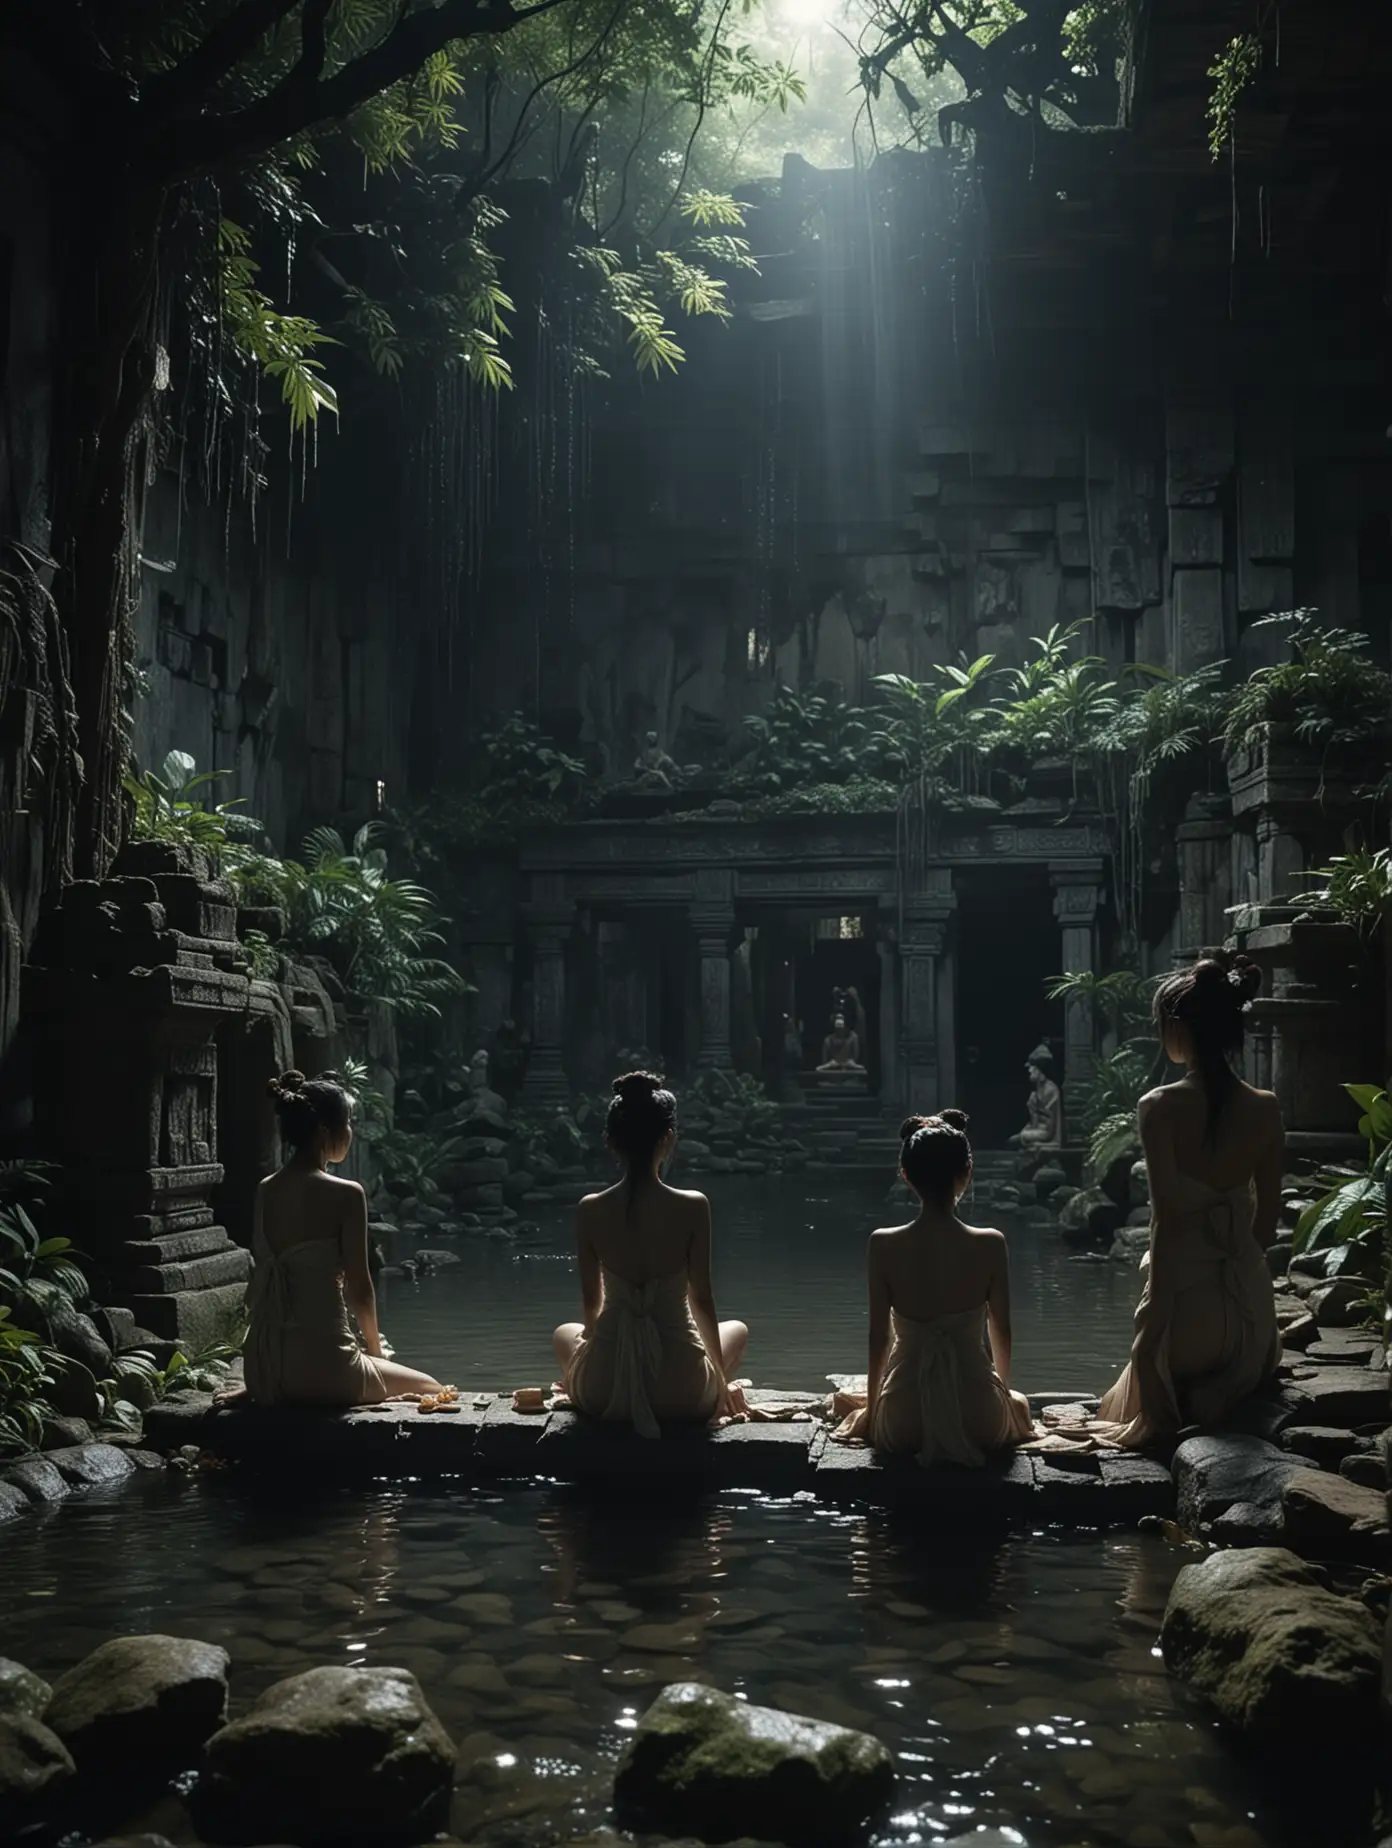 exploitation movie still photo showing a few Japanese priestesses, bathing at a lonely ruined jungle temple, close up figures composition, dark dappled moonlight night, sensual